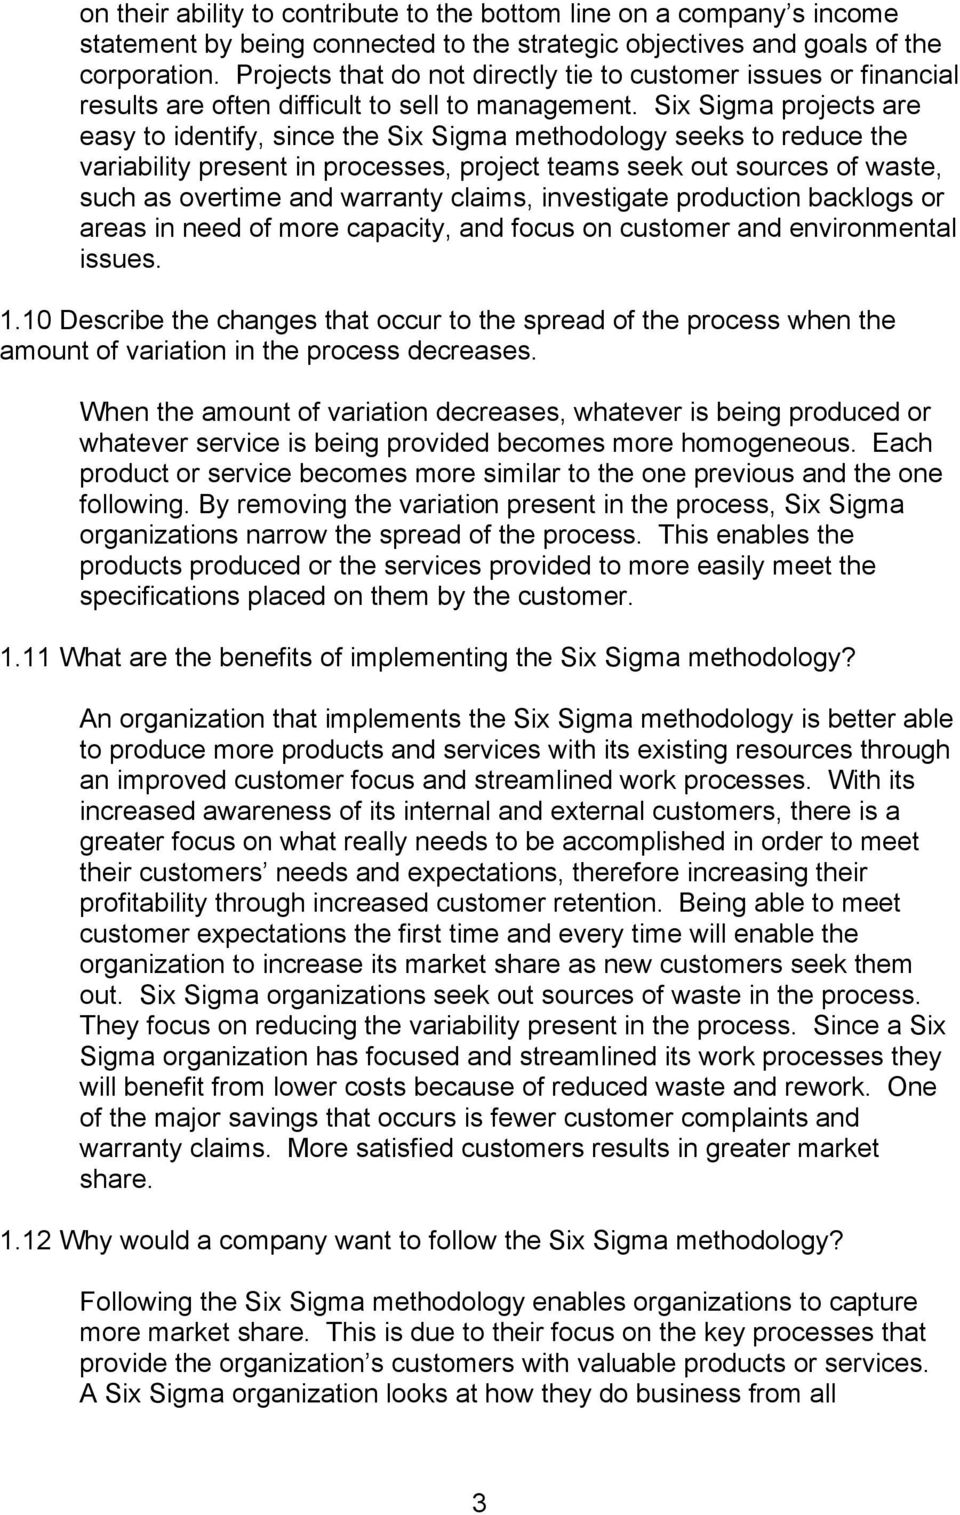 Six Sigma projects are easy to identify, since the Six Sigma methodology seeks to reduce the variability present in processes, project teams seek out sources of waste, such as overtime and warranty